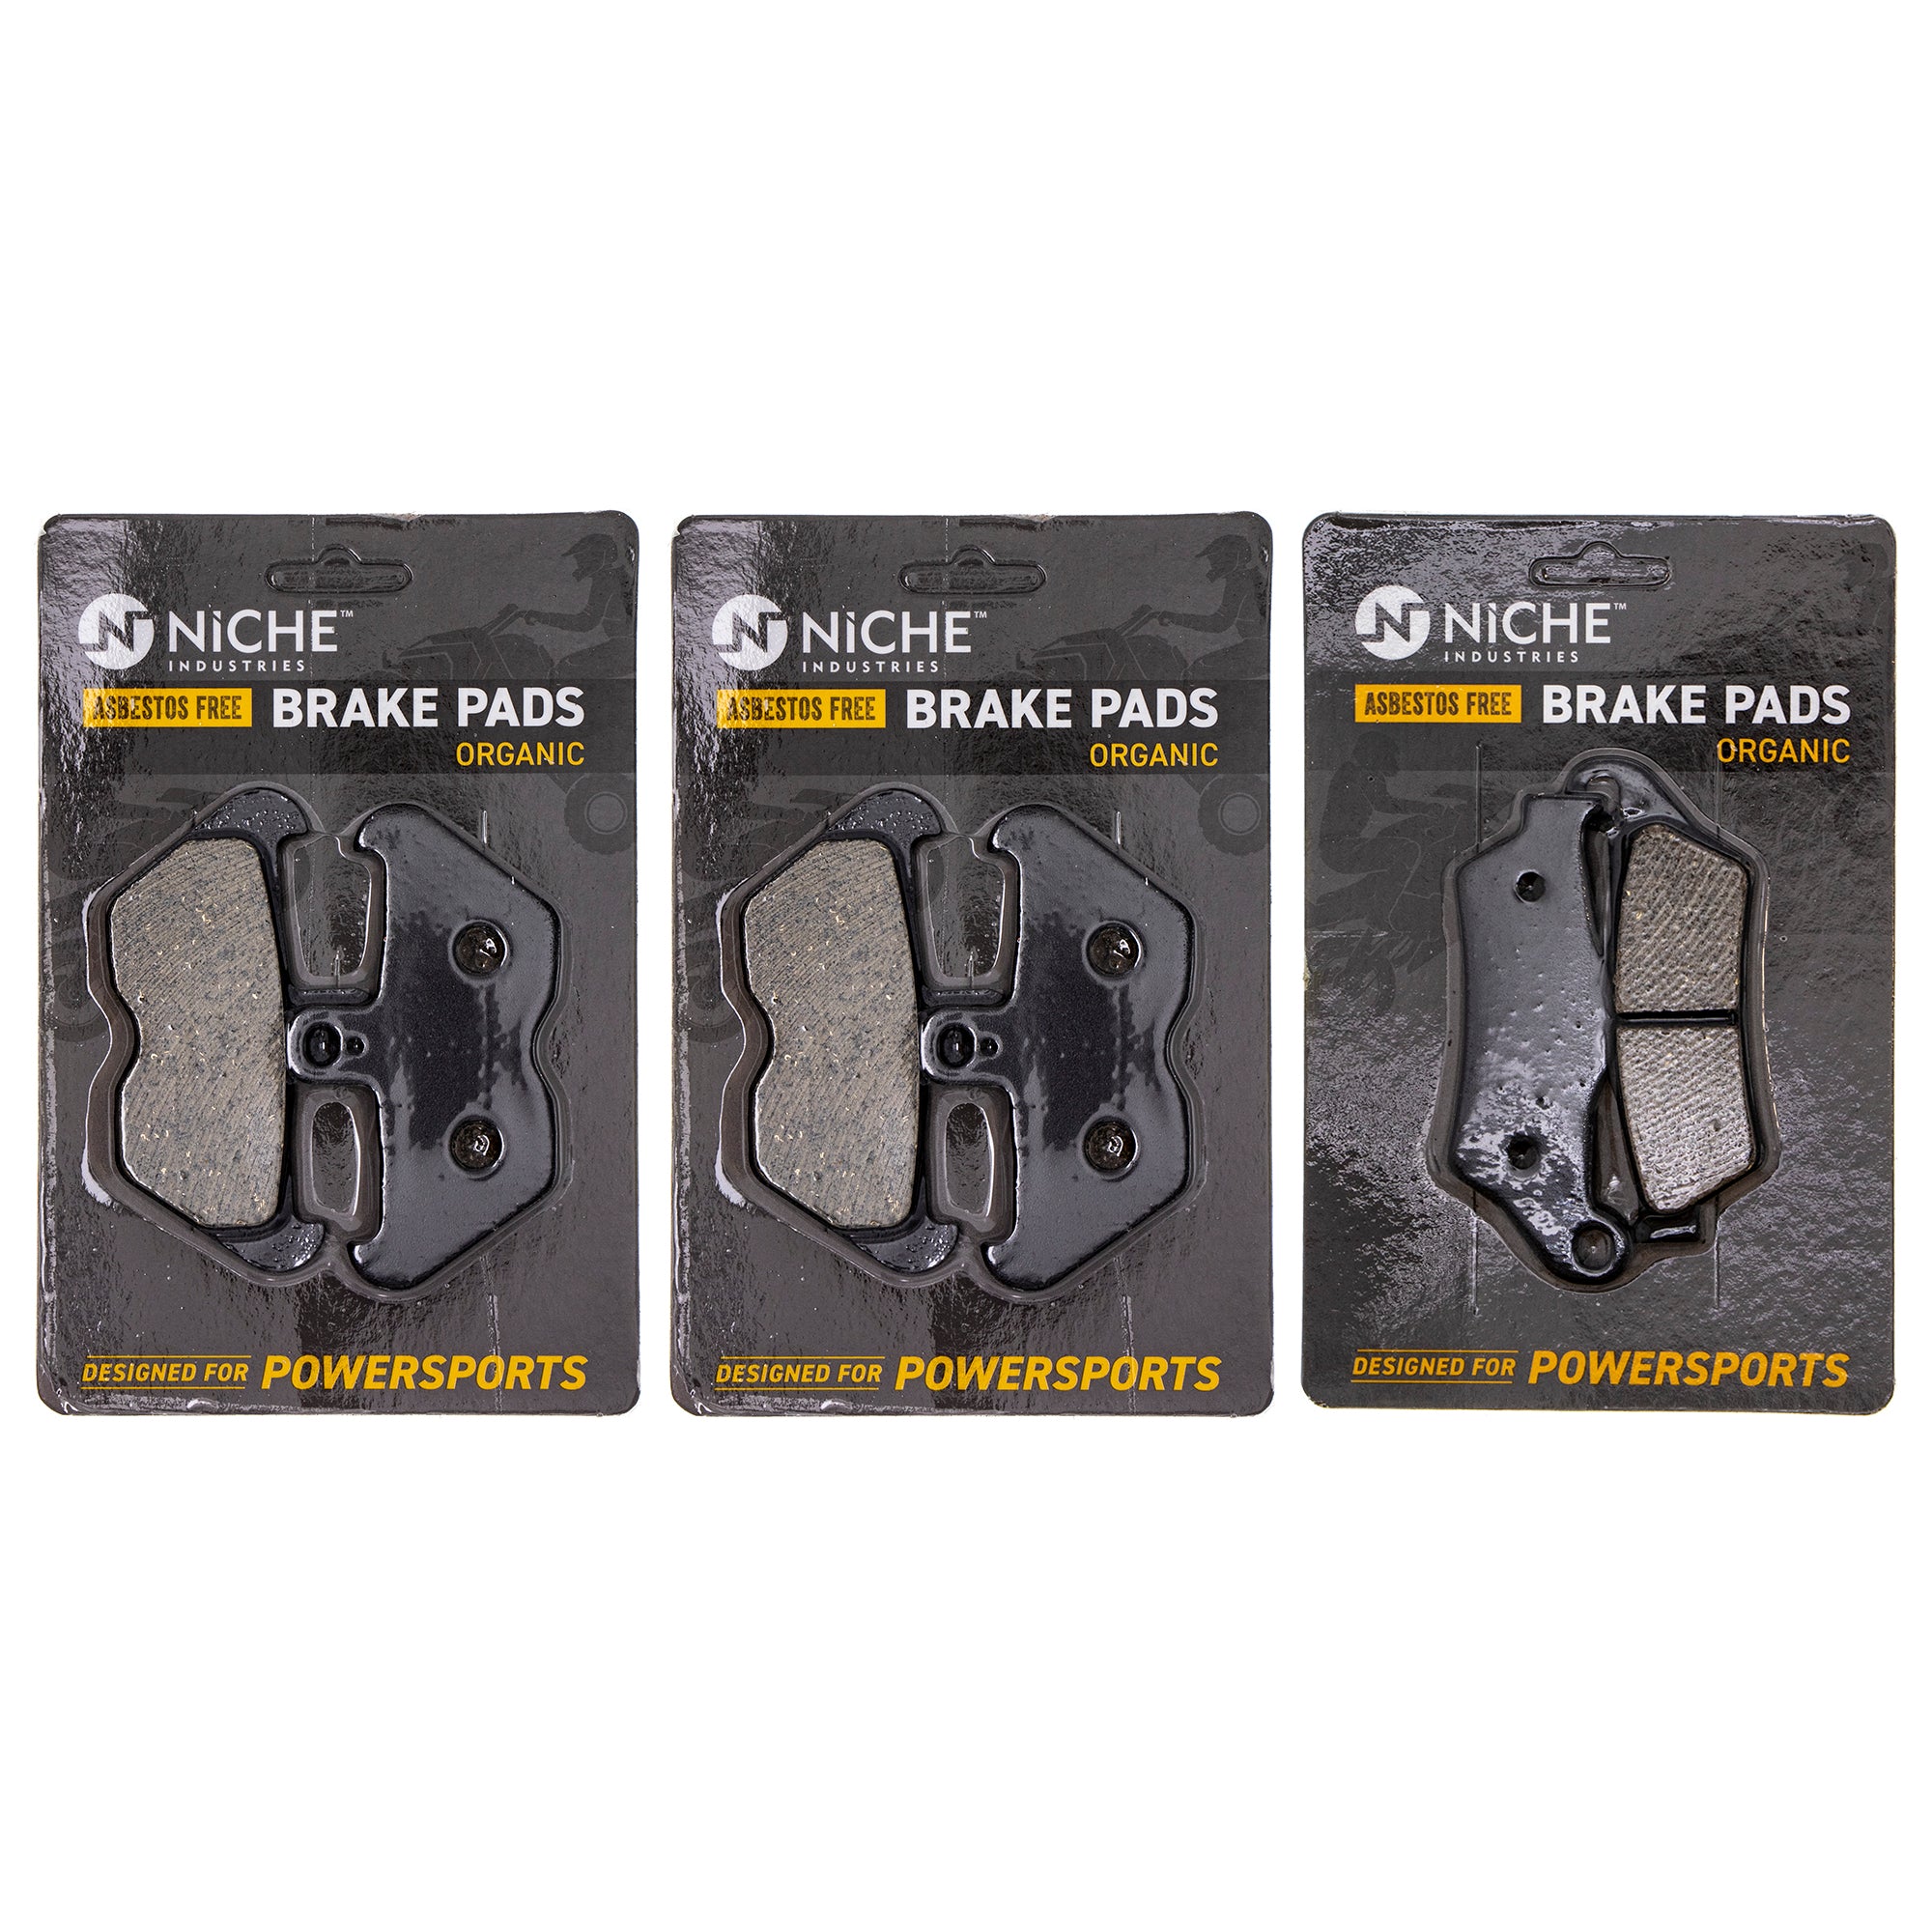 Brake Pad Kit Front/Rear for zOTHER BMW R850R R1200C R1150GS R1100S 34212335465 NICHE MK1002715